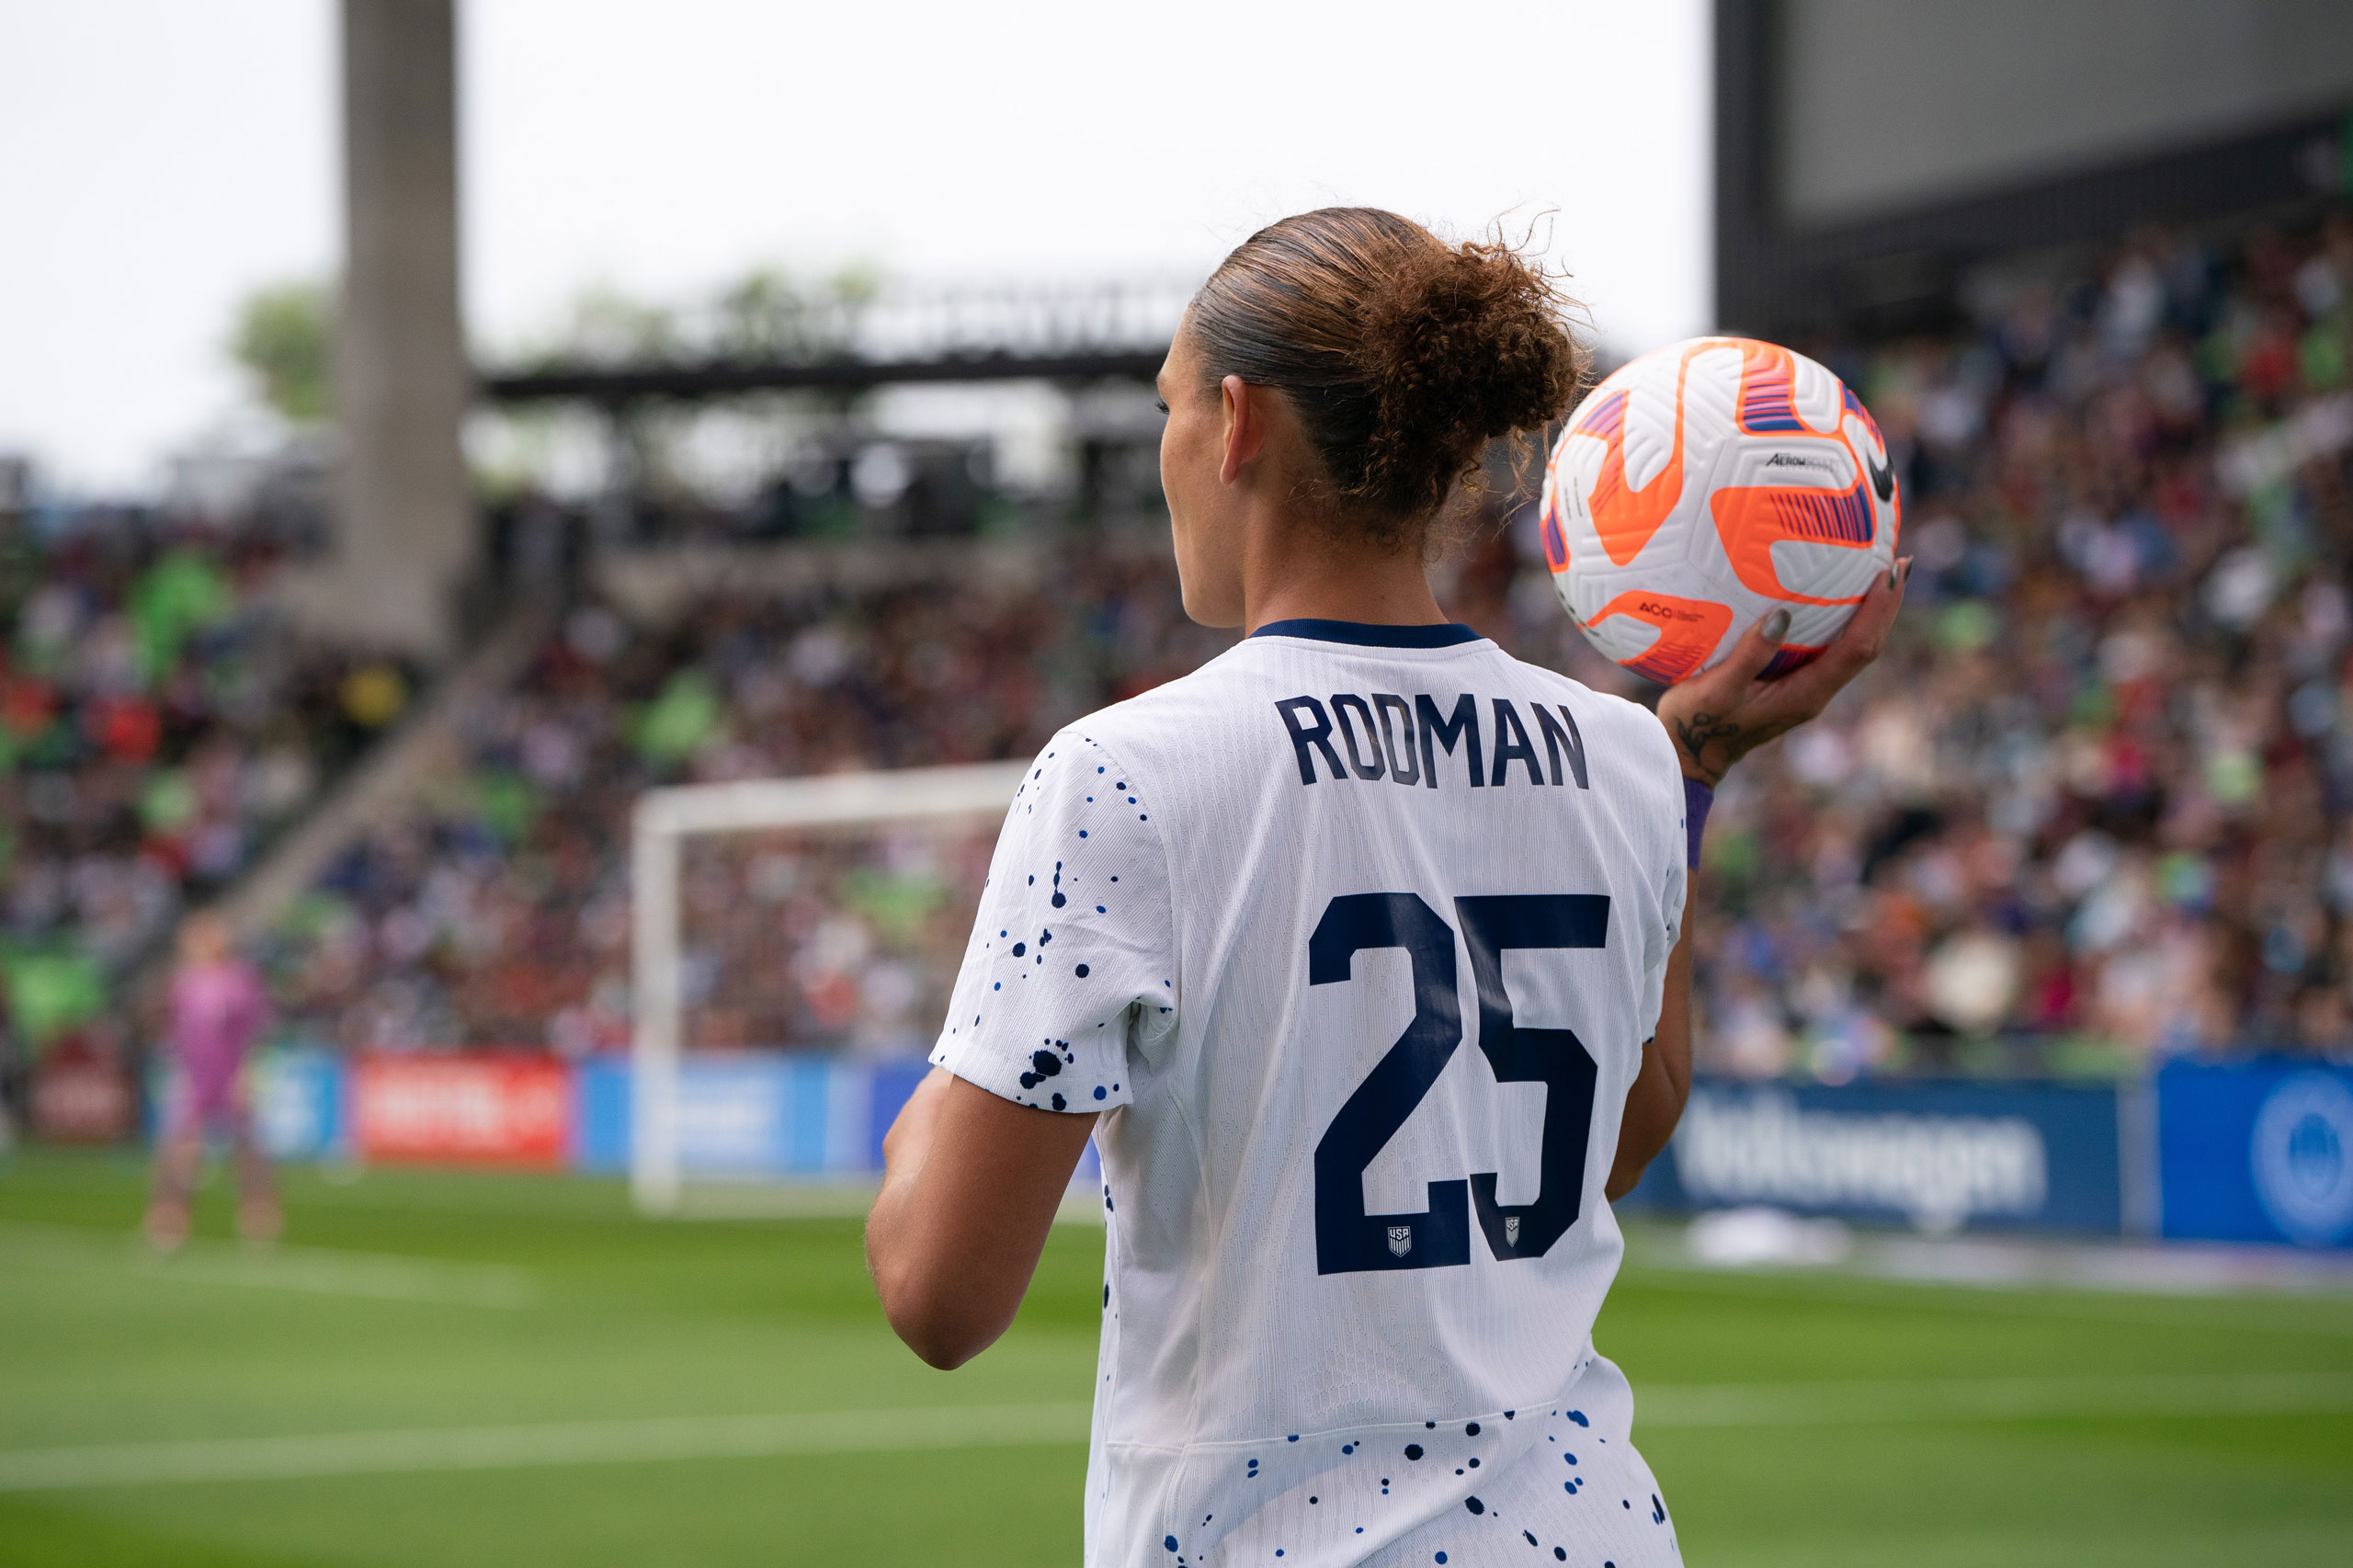 Trinity Rodman prepares for a throw-in during an international friendly between Ireland and the United States in Austin, Texas, on April 8, 2023. (John Todd—USSF/Getty Images)